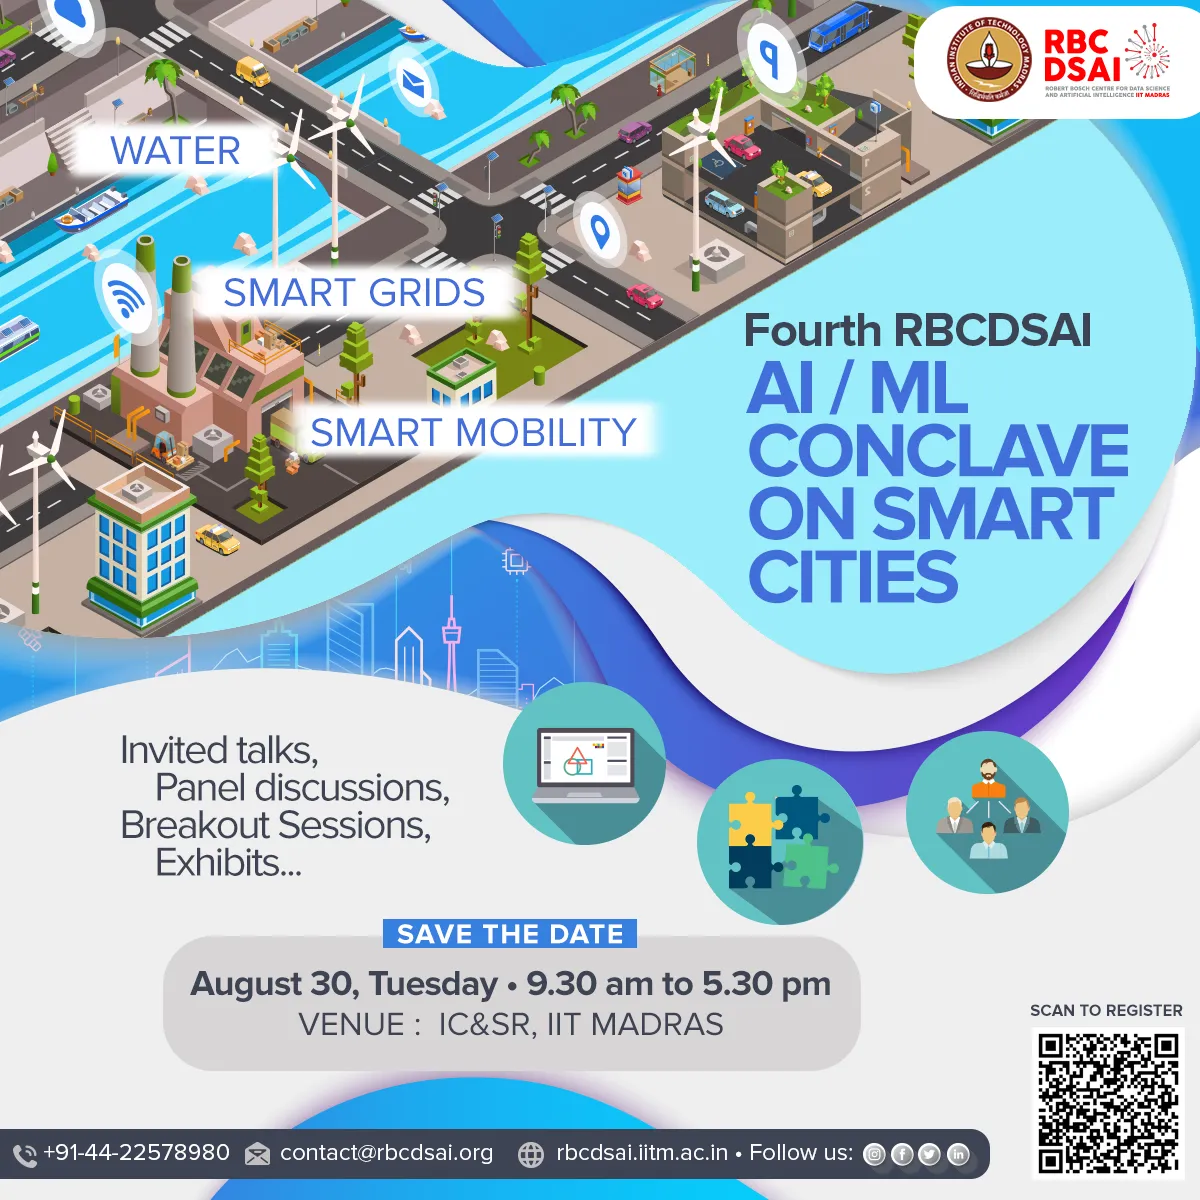 Fourth RBCDSAI AI/ML Conclave on Smart Cities